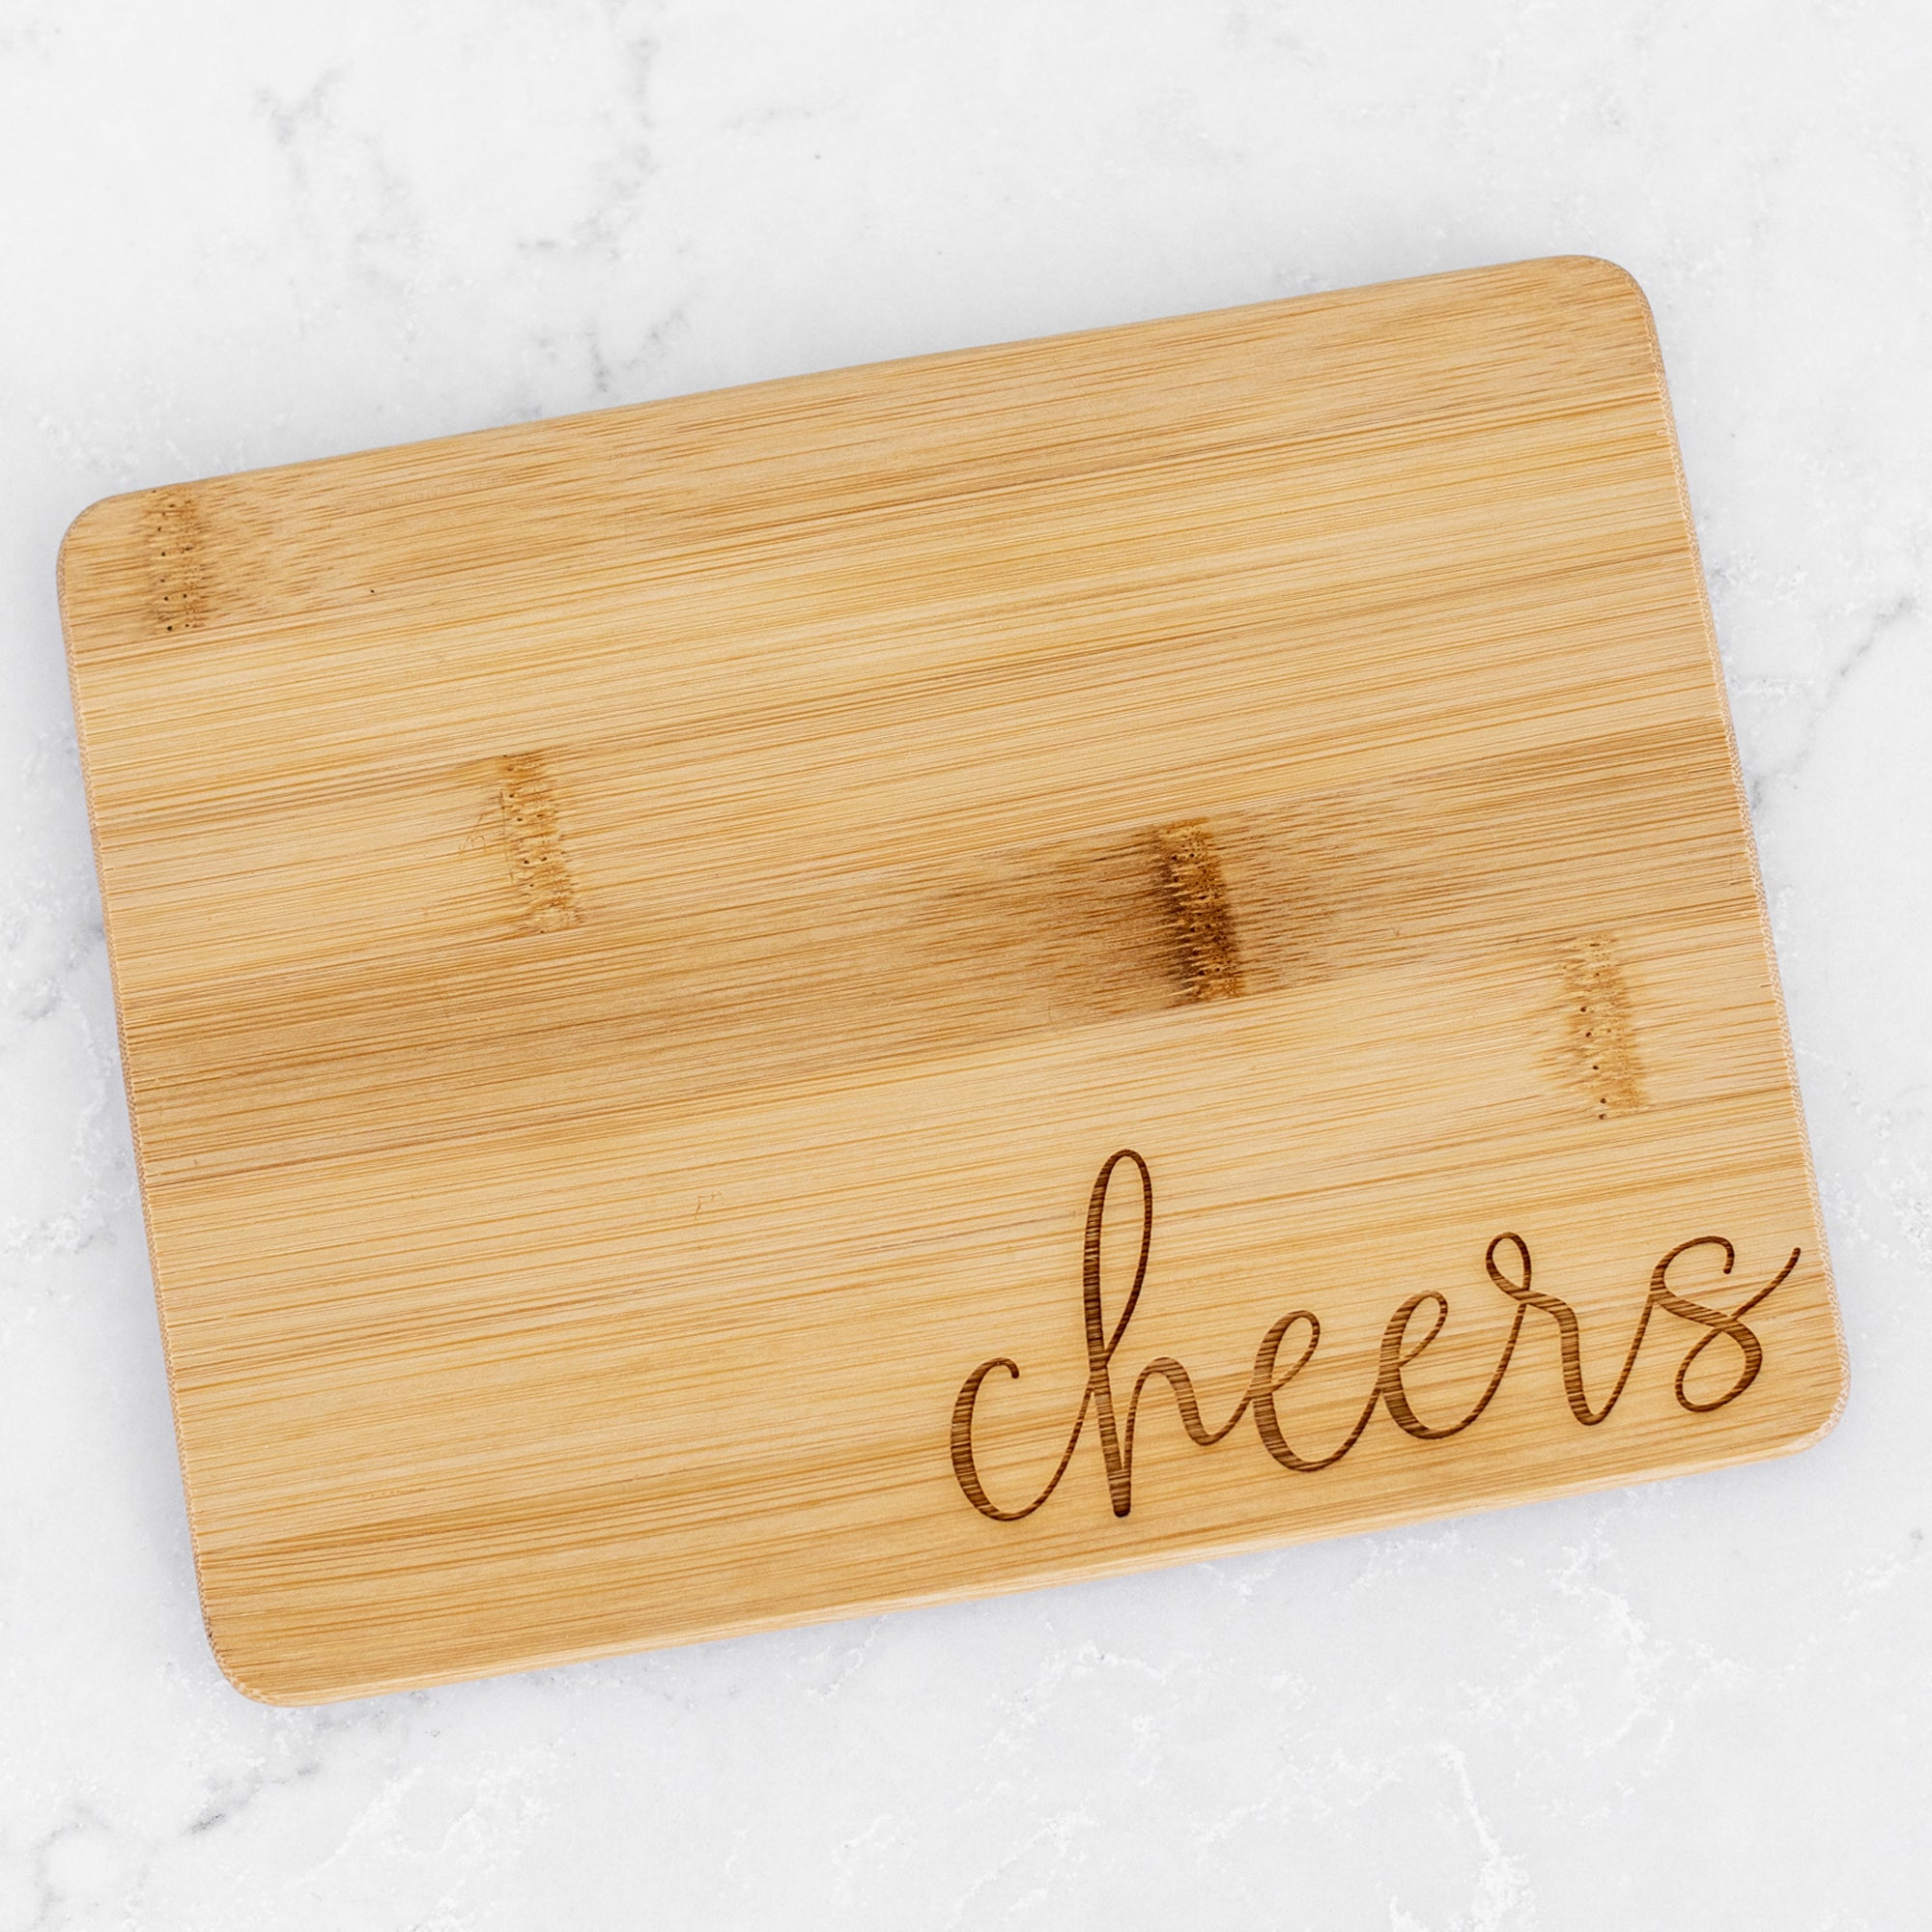 Cheers - Engraved Bamboo Bar Board - 6 X 8 Inches